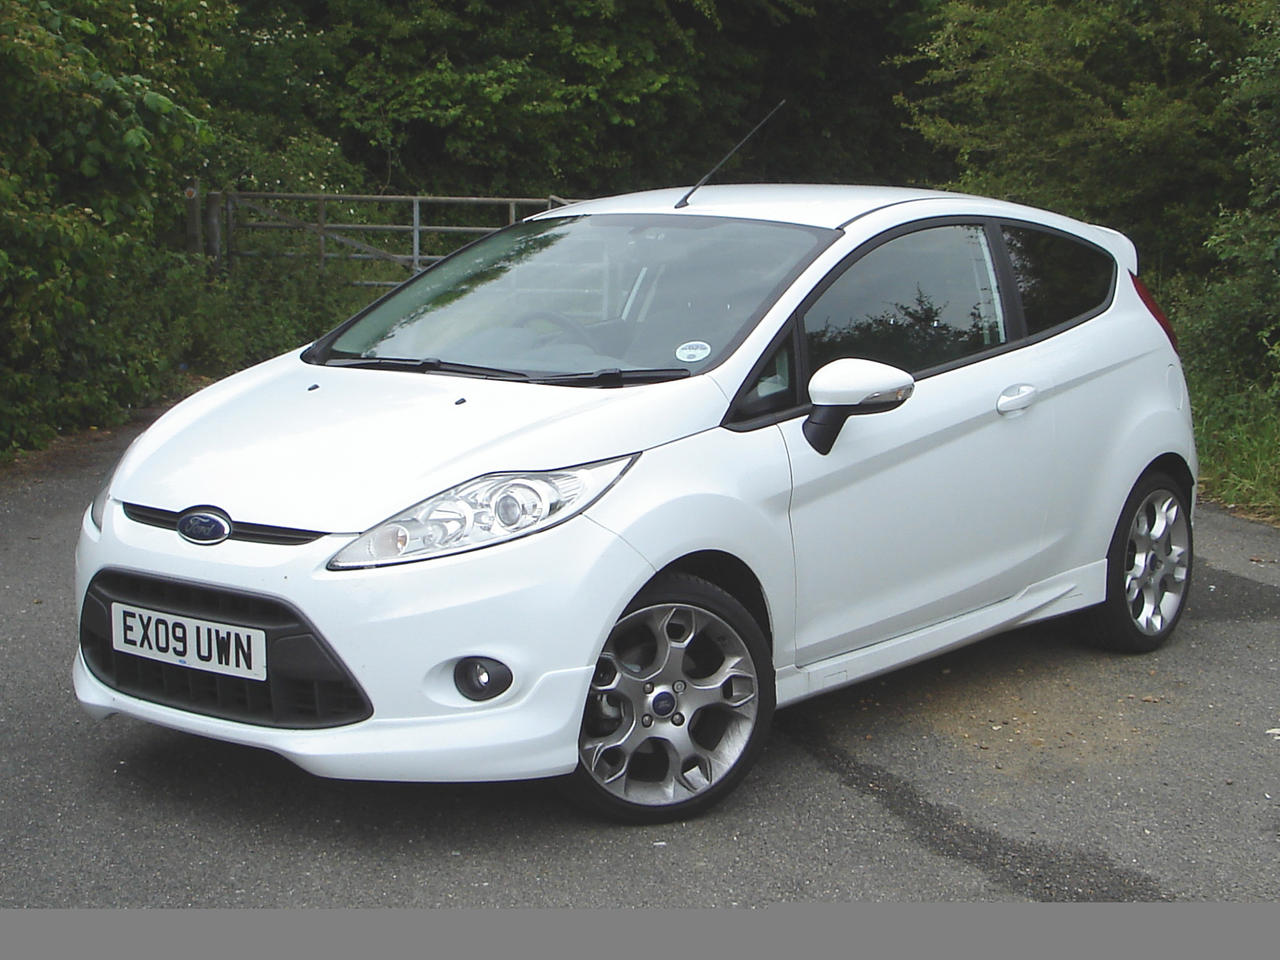 Fiesta Mk7 1.4 '10 Upgrade/s - General Ford Related Discussions - Ford  Owners Club - Ford Forums